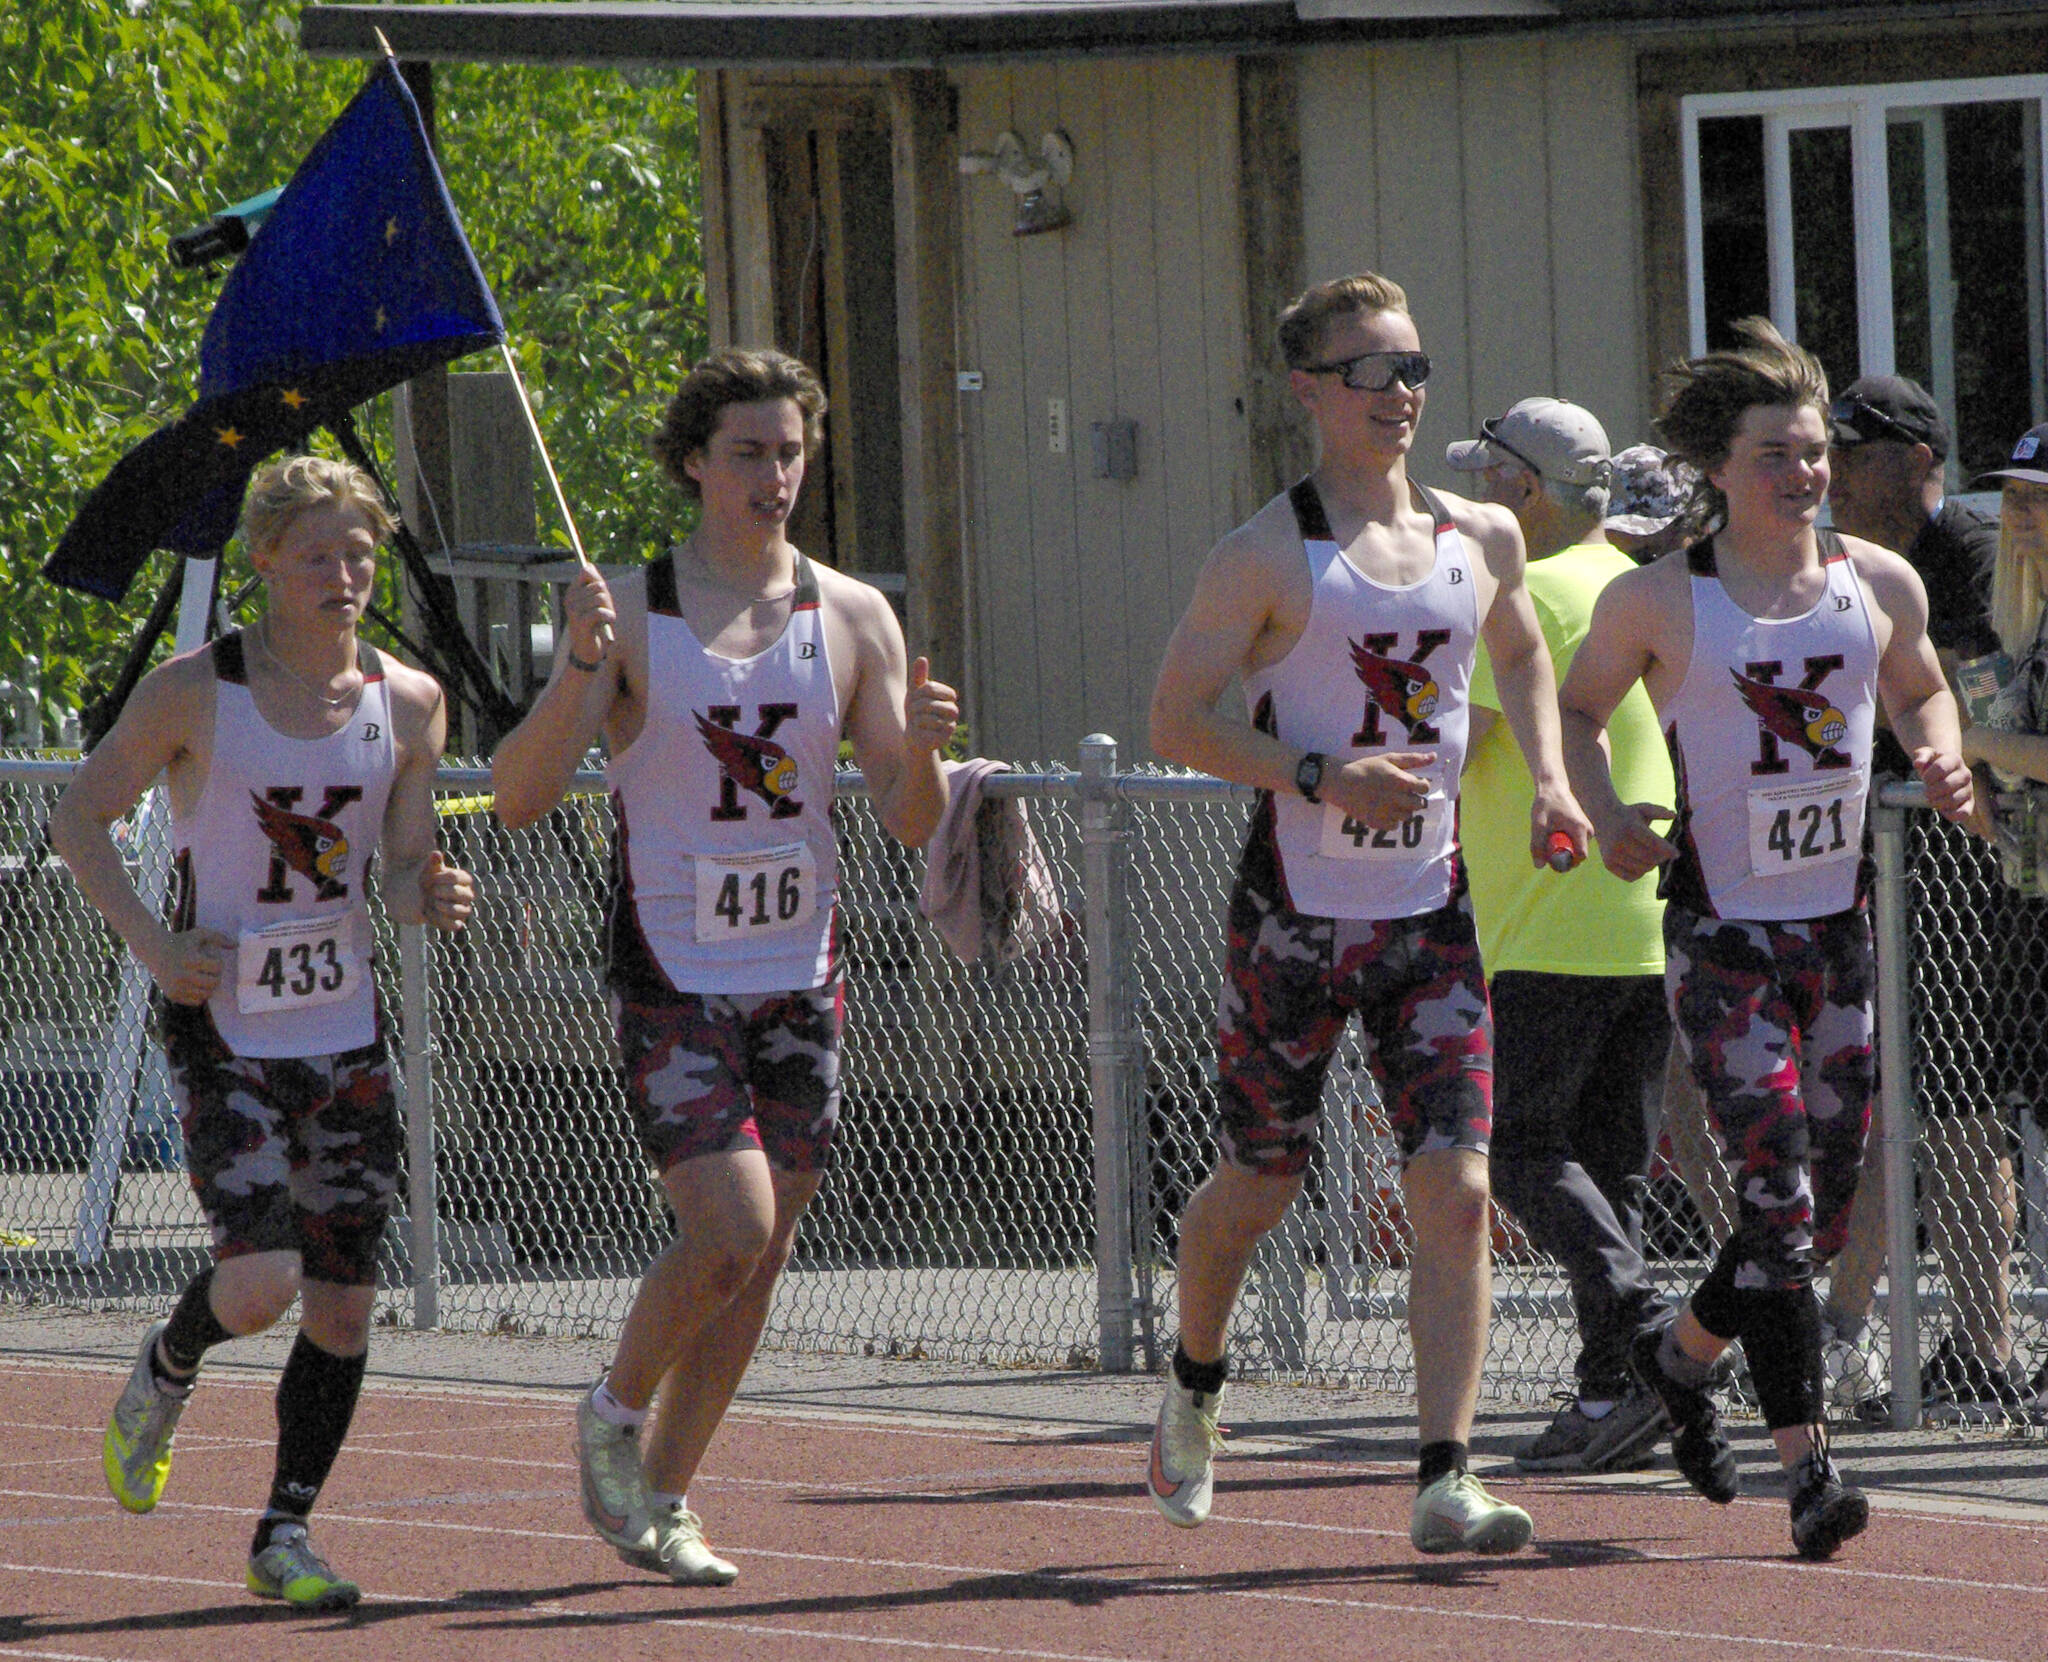 Kenai Central’s James Sparks, Jacob Begich, Tyler Hippchen and Reagan Graves celebrate after winning the 400-meter relay Saturday, May 28, 2022, at the Division II state track and field meet at Dimond High School in Anchorage, Alaska. (Photo by Jeff Helminiak/Peninsula Clarion)